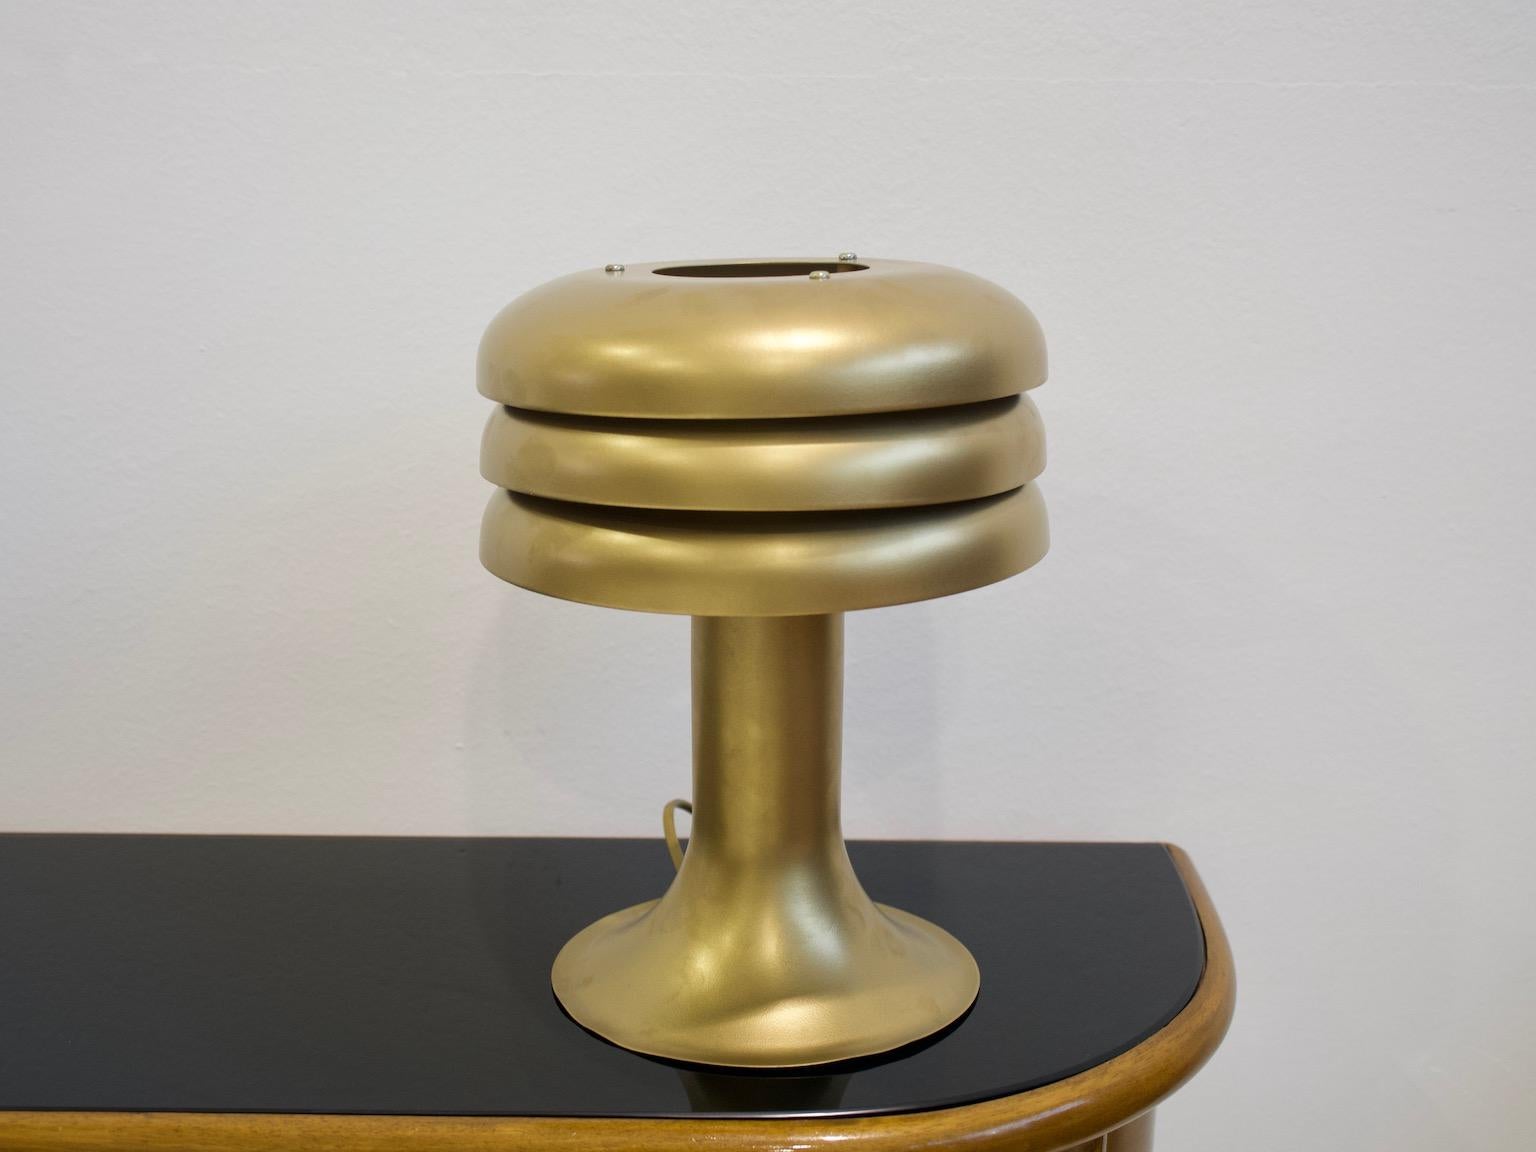 Table lamp, model BN-25, of sheet metal designed by Hans-Agne Jakobsson. Produced by Hans-Agne Jakobsson AB in Markaryd, Sweden. Height 31 cm and diameter 24 cm. Some age-related wear, re-lacquered.